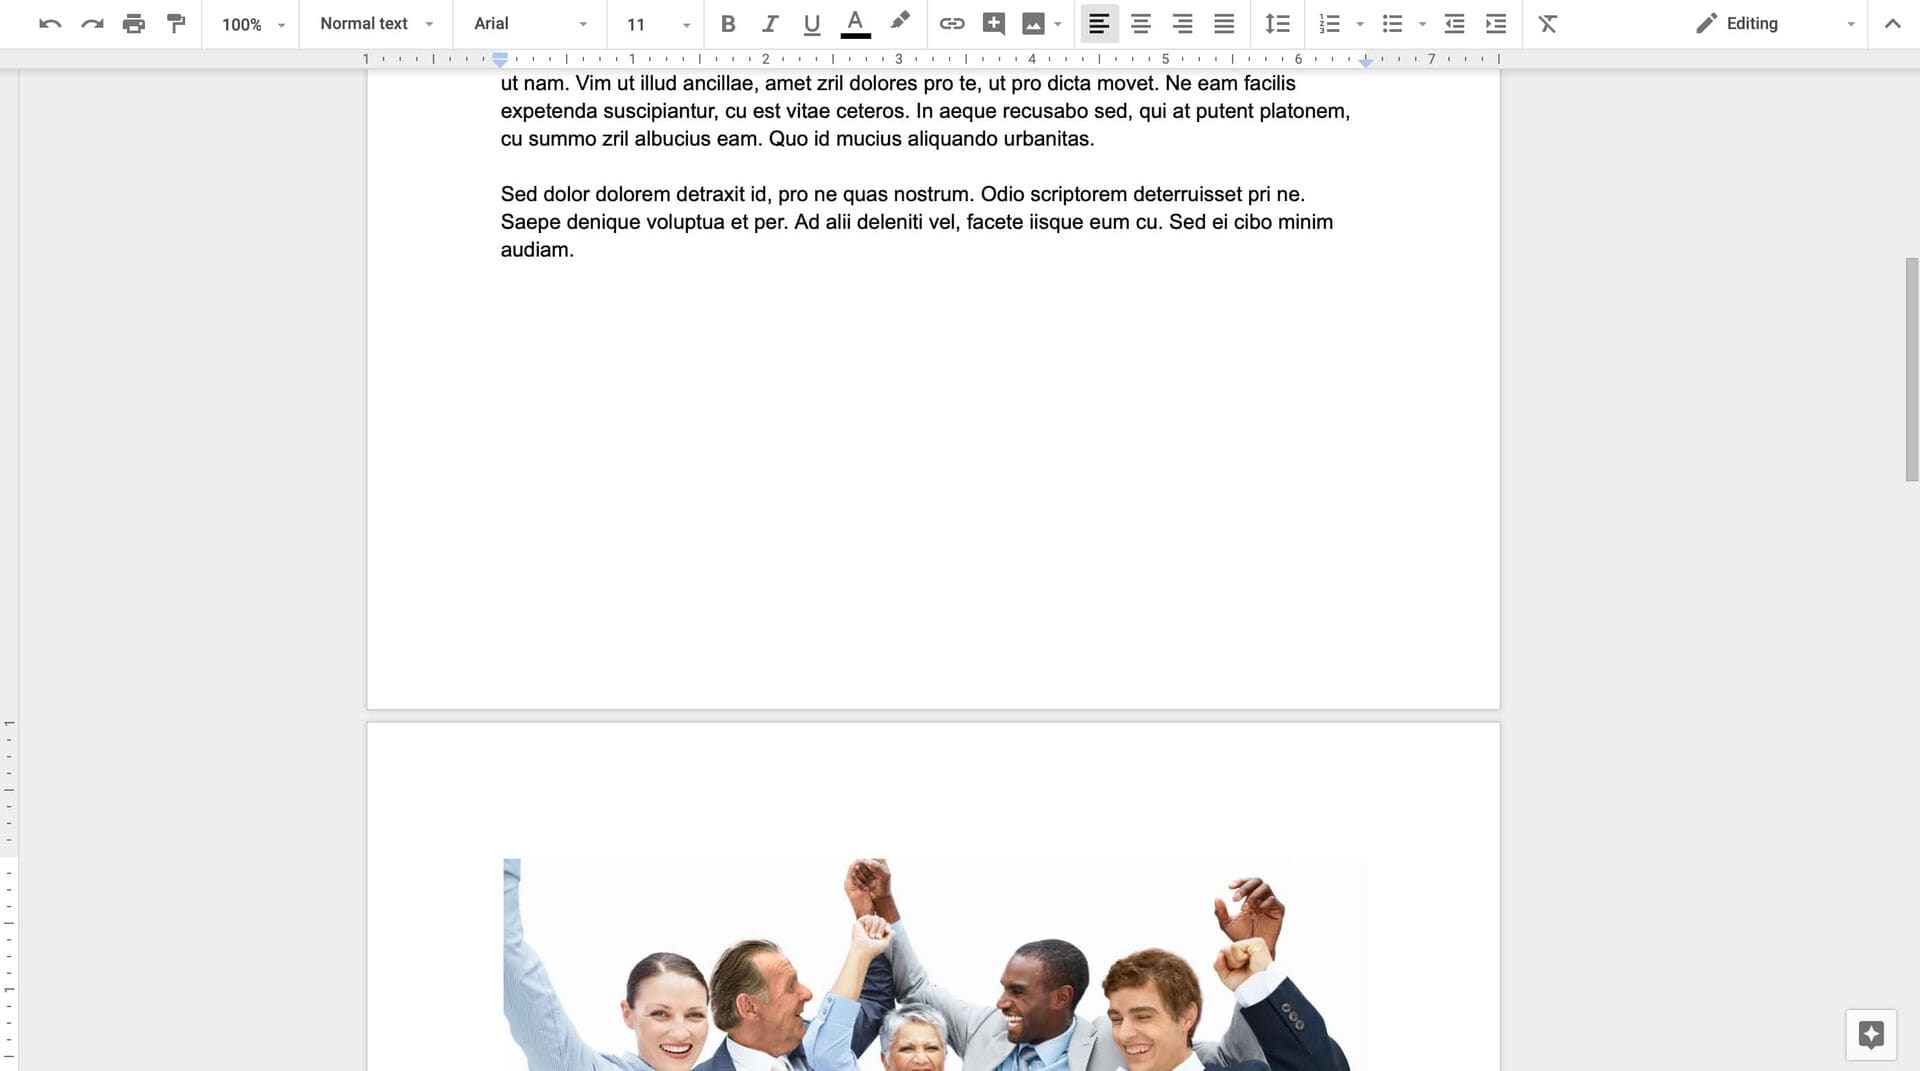 Page breaks in Google Docs are annoying.